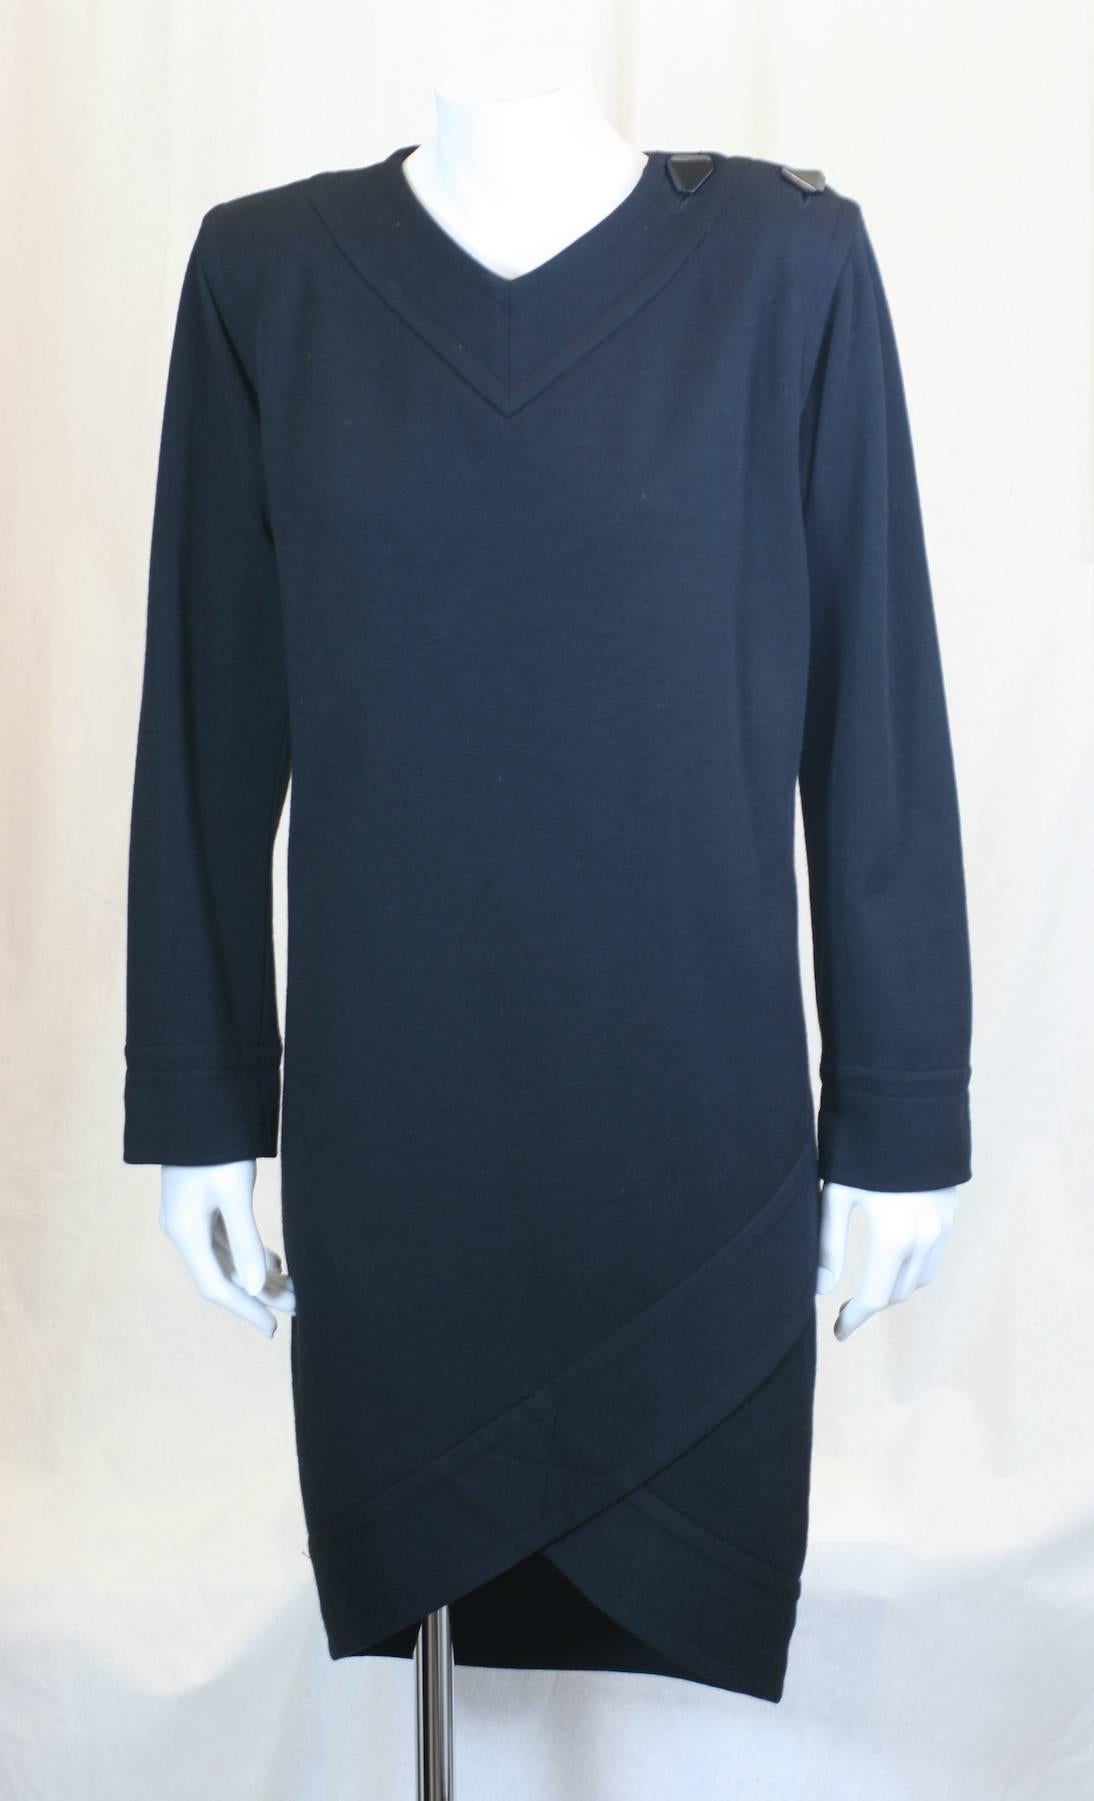 Yves Saint Laurent Black Jersey Faux Wrap Dress with strong shoulders and slim straight cut.
2 button closure at shoulder and faux wrap detail at dipping hem. Wool jersey double knit with
silky lining. 
Small hole on top left shoulder, see image.